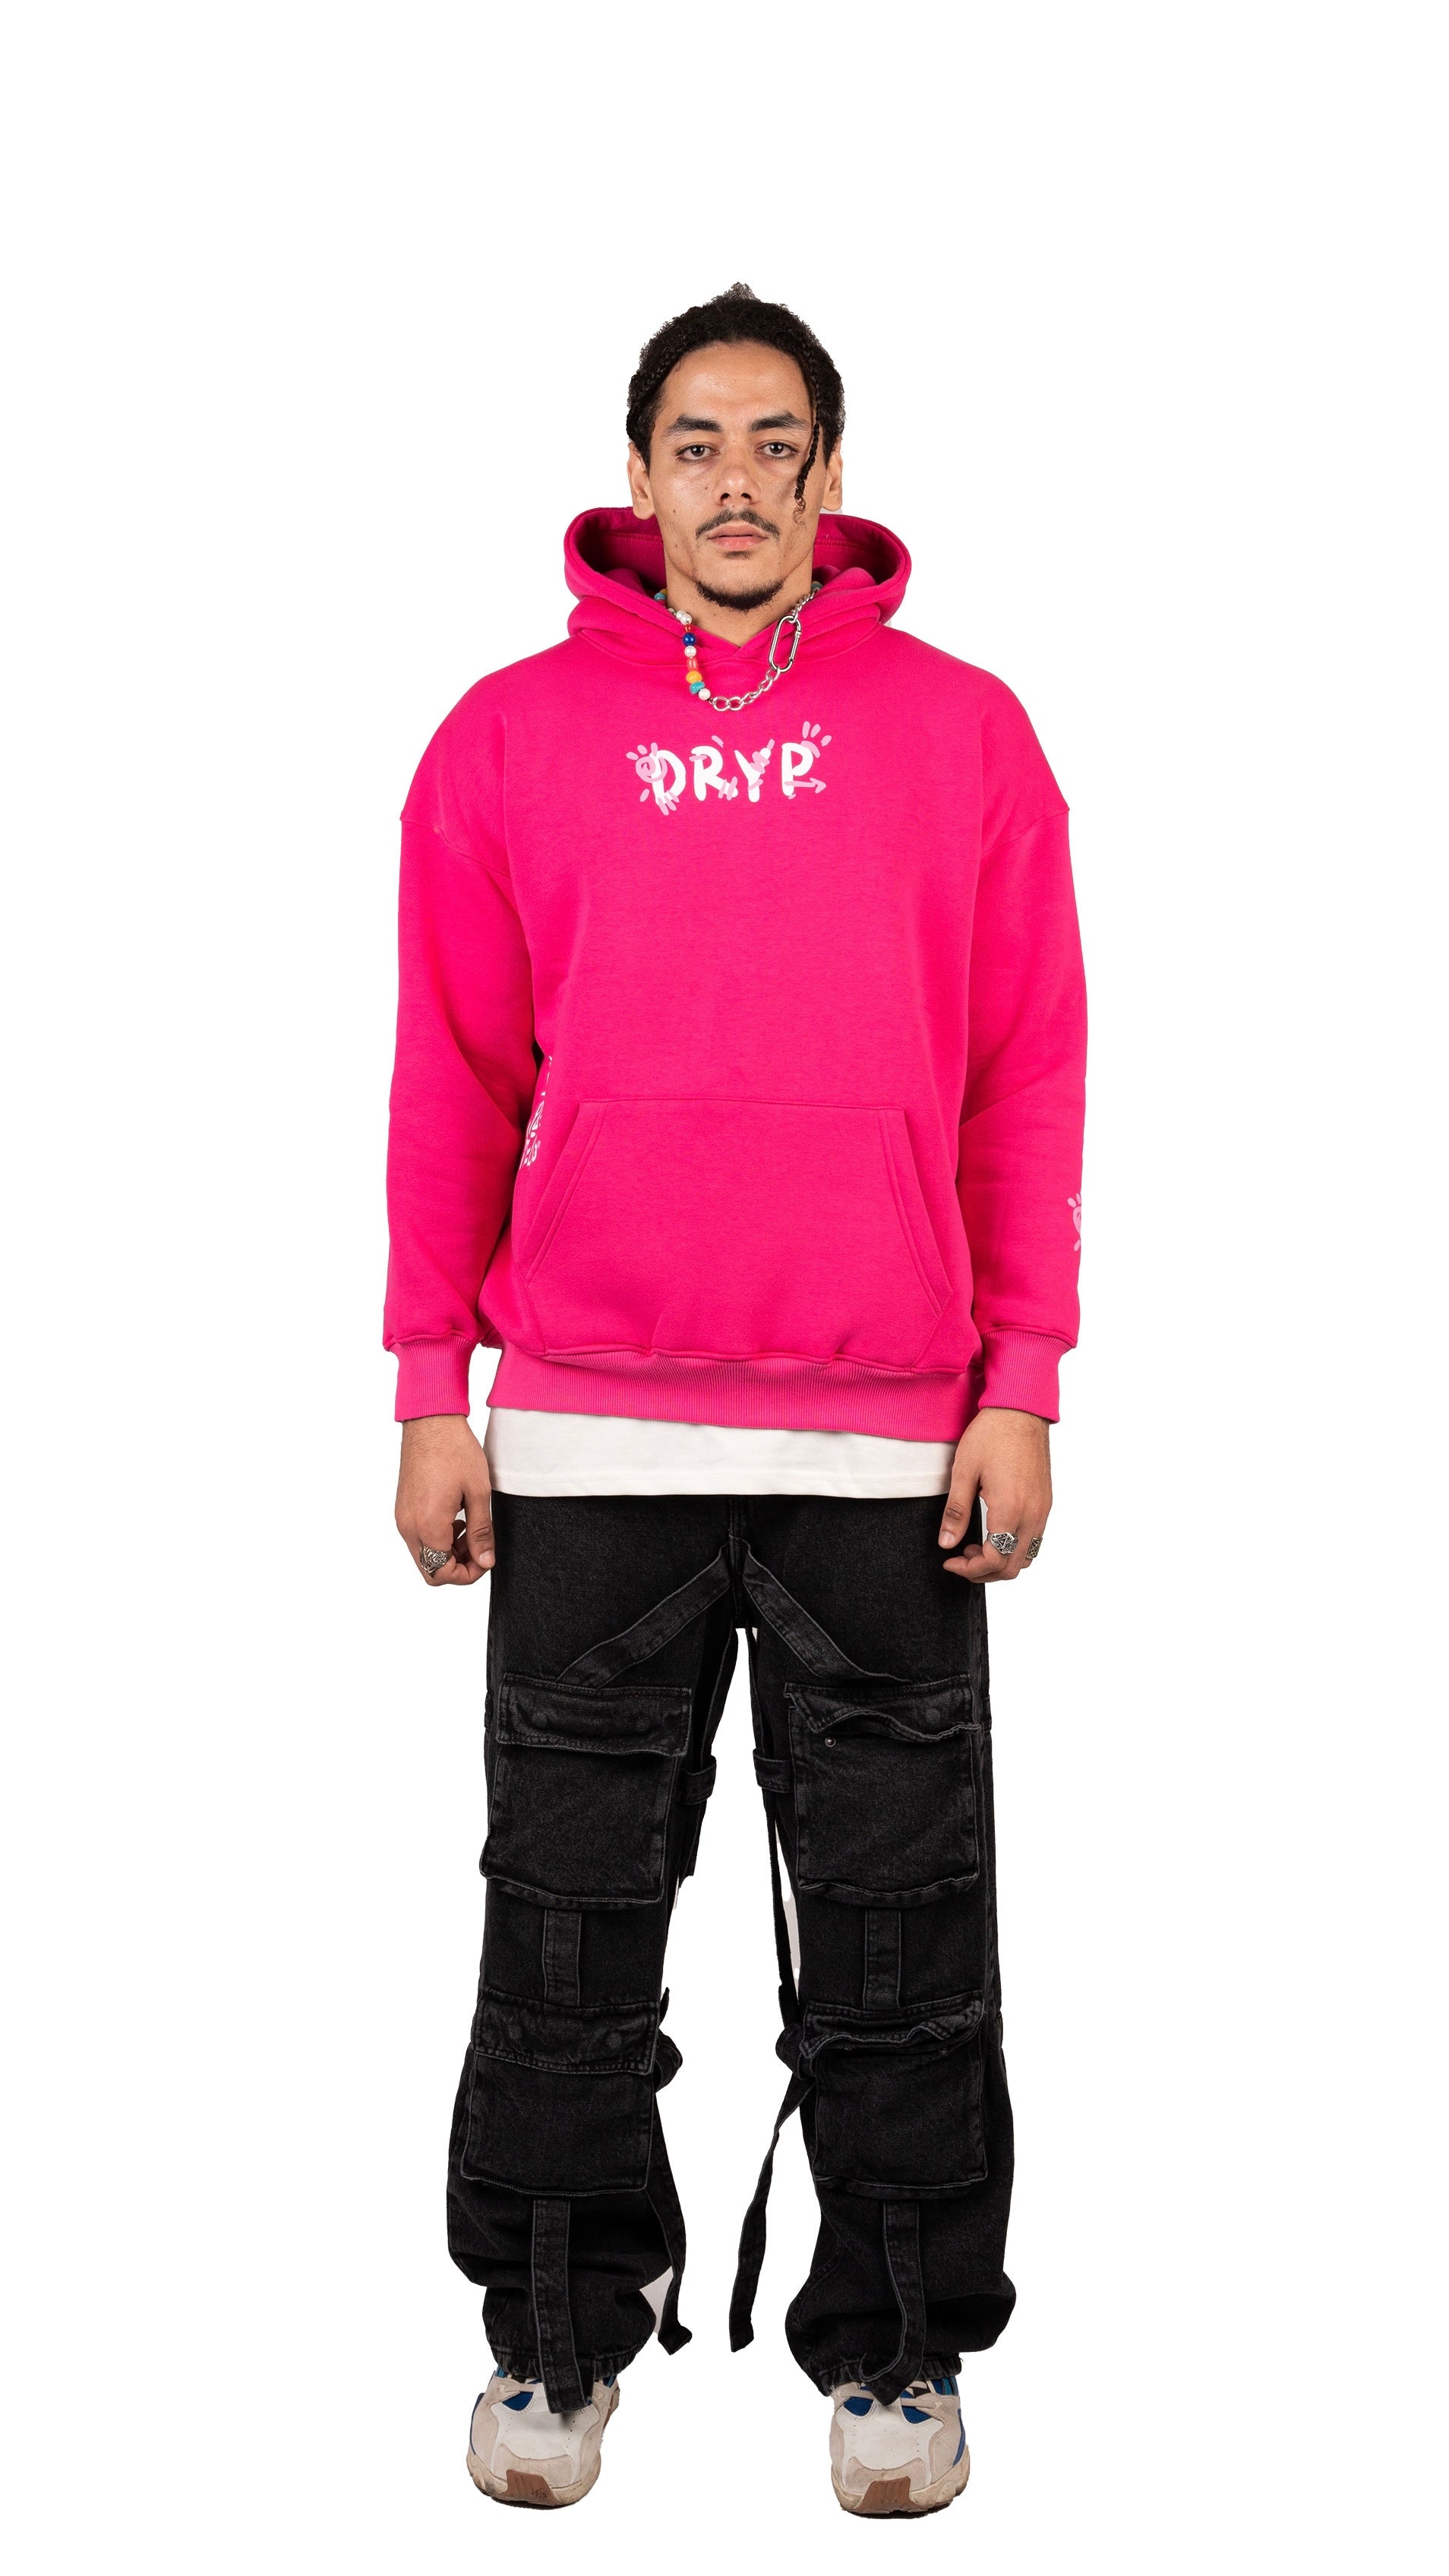 The fruit punch hoodie